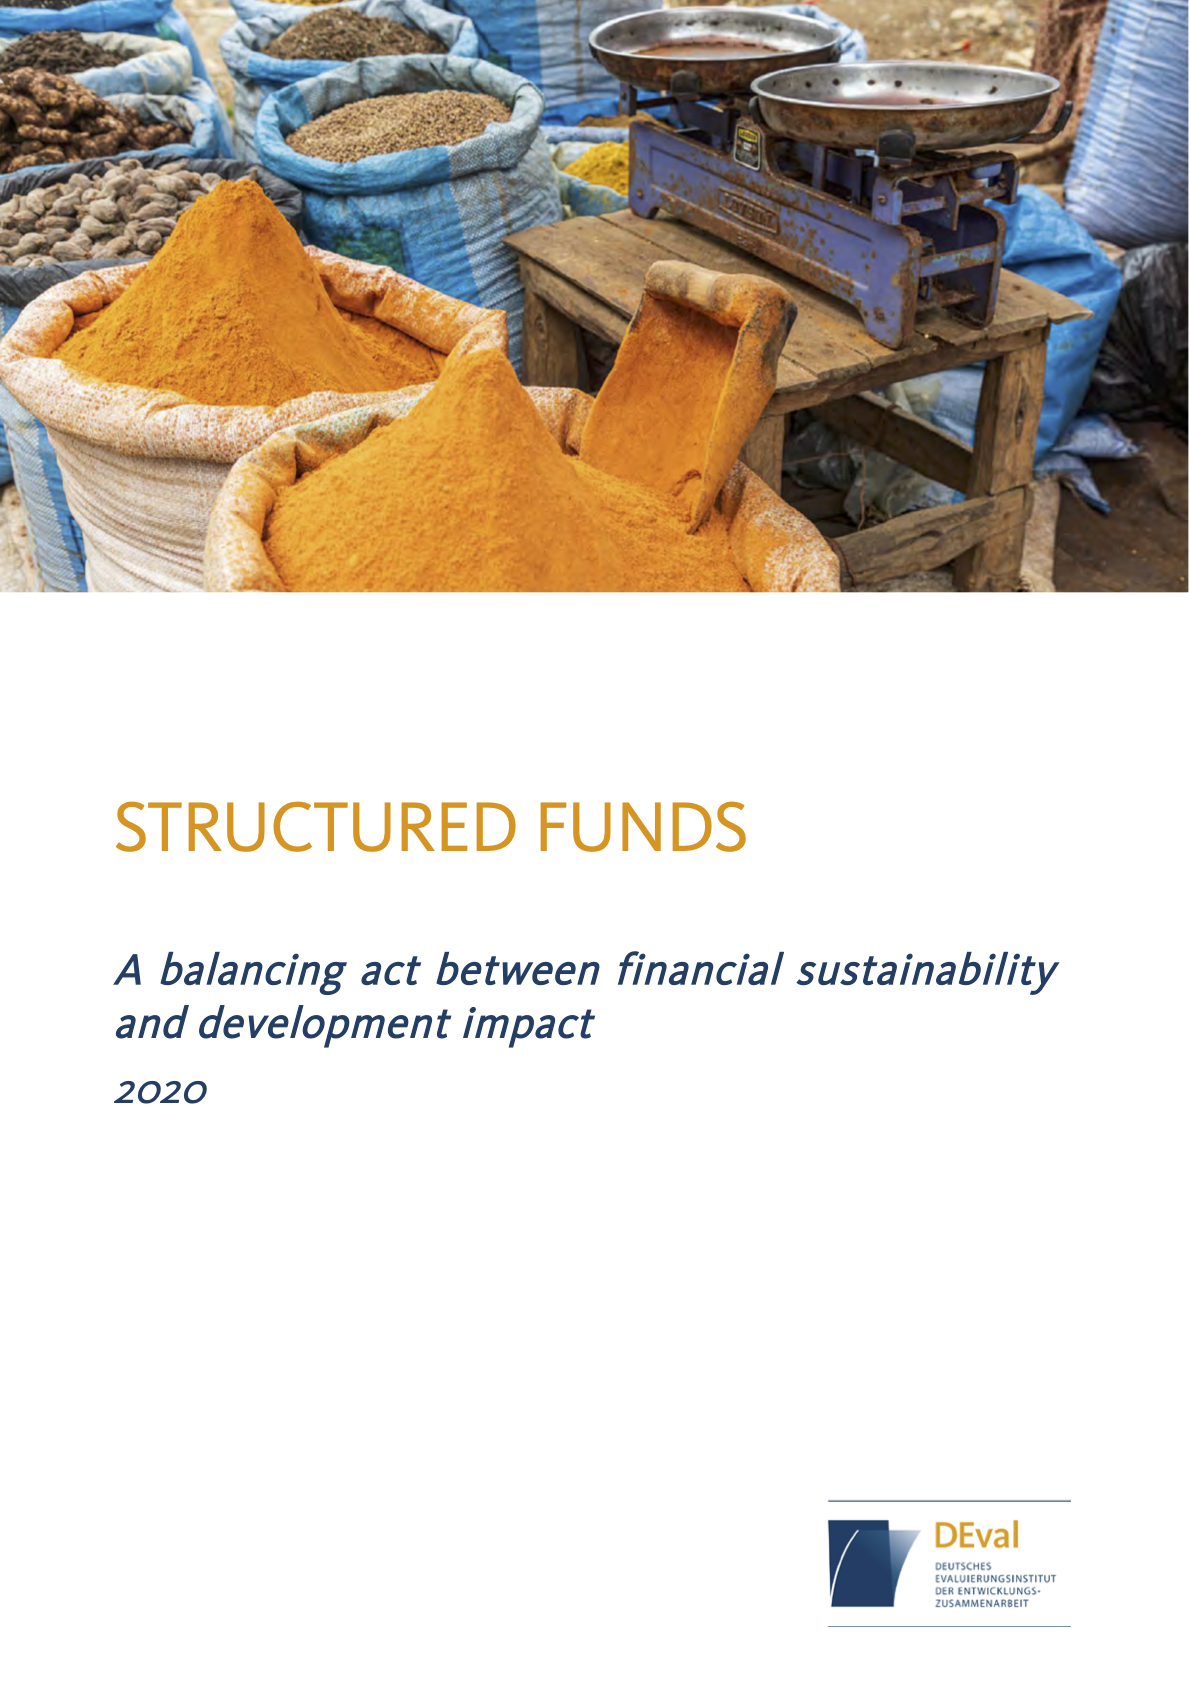 Structured Funds: A balancing act between financial sustainability and development impact